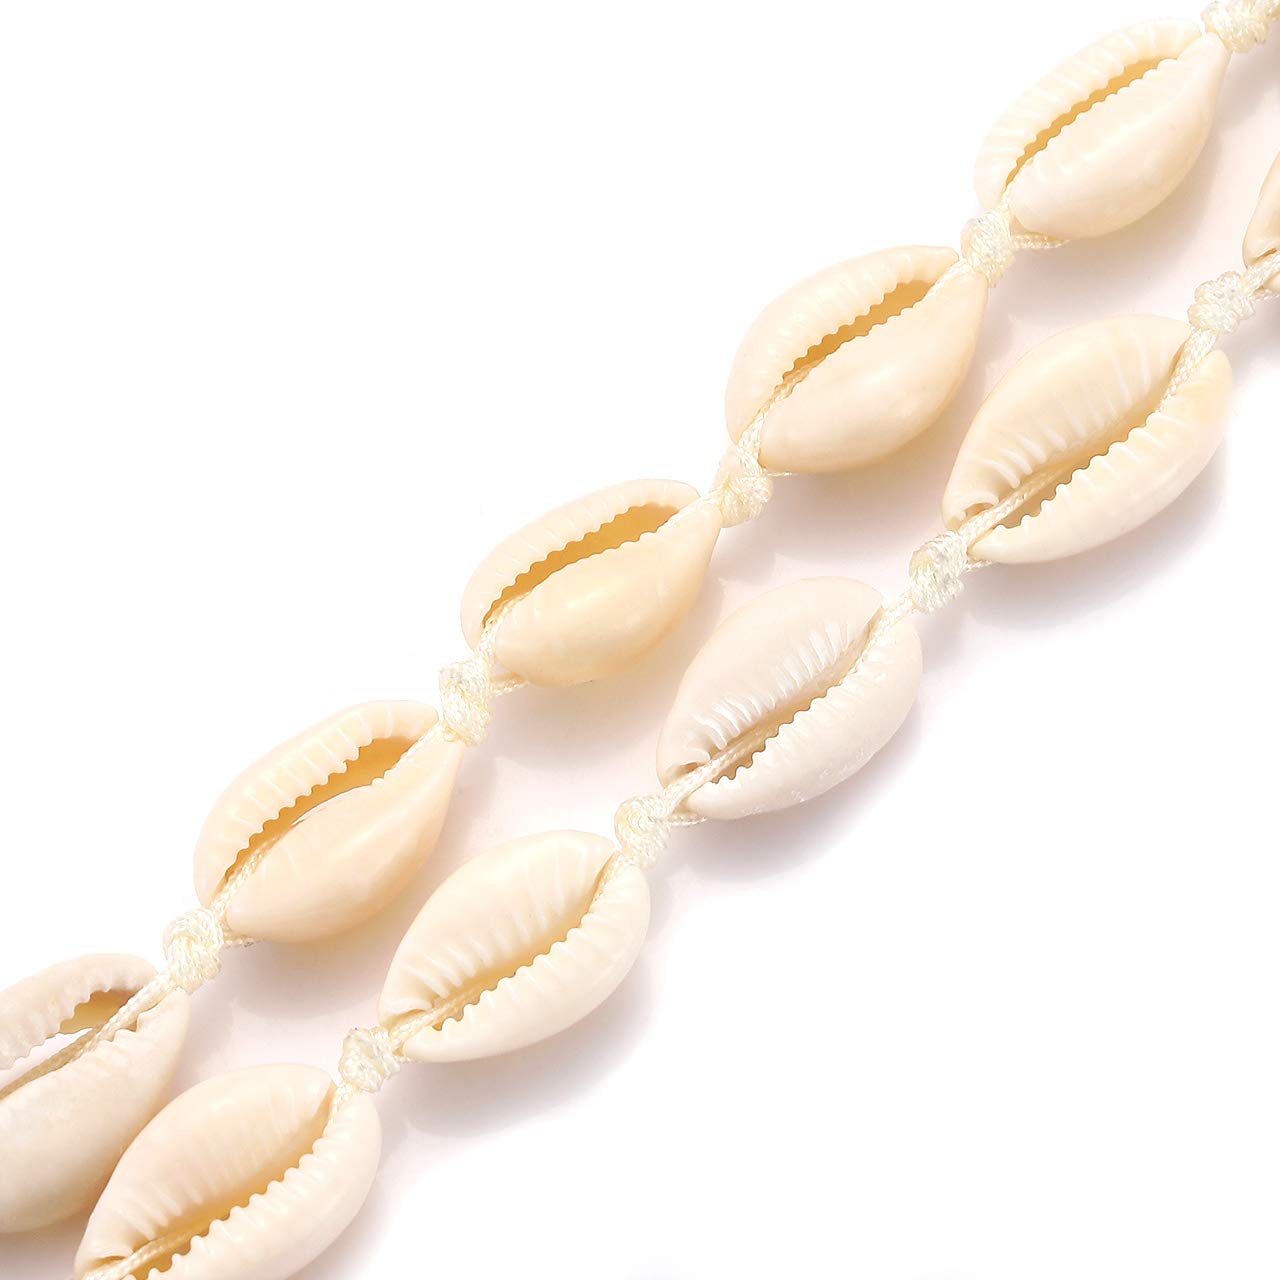 CENAPOG Cowrie Shell Choker Necklace for Women Puka Shell Necklace Corded Seashell Necklace Hawaiian Beach Jewelry